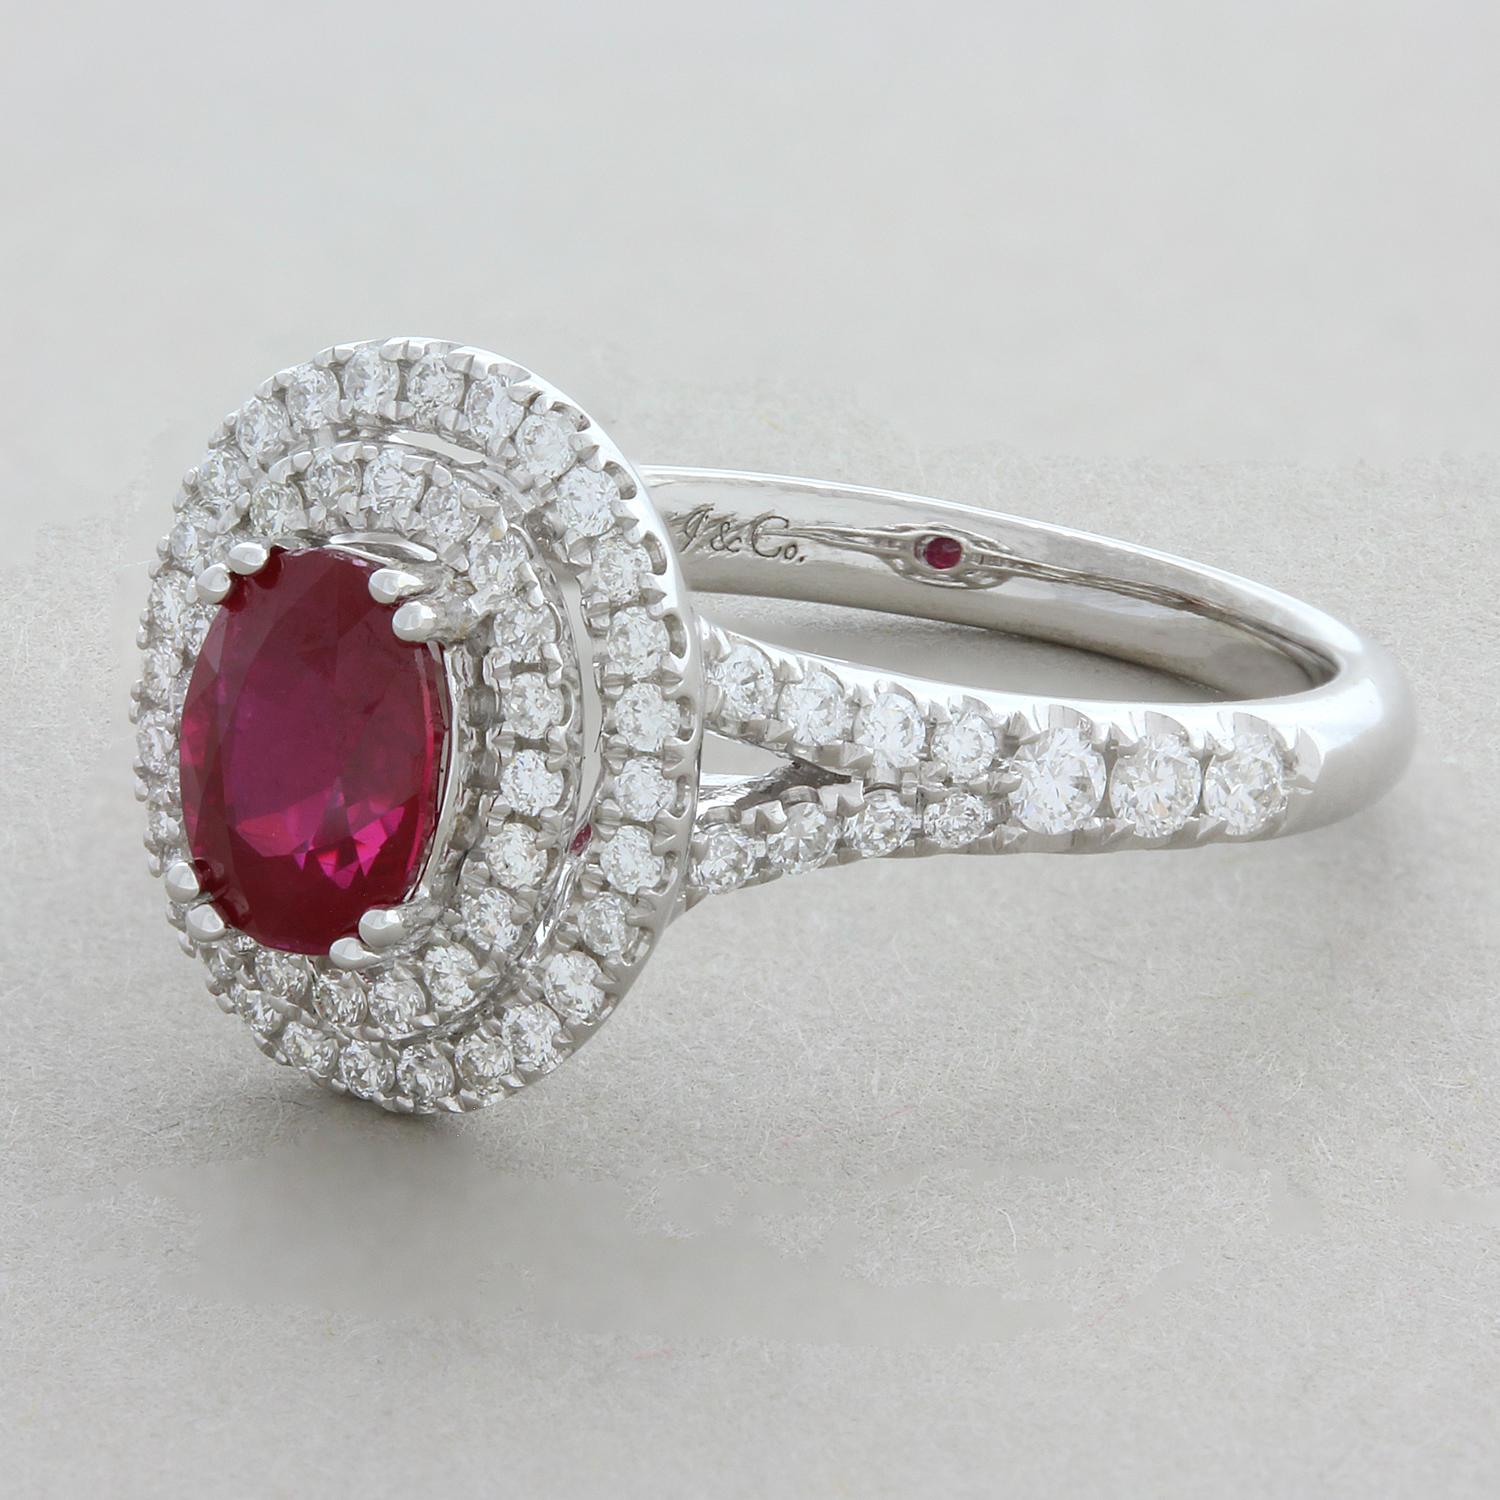 This everyday ring features a super gem 1.18 carat vivid red ruby. It is accented by a double halo of round brilliant cut diamonds with more diamonds running down the shoulders of the ring. The diamonds weight 0.59 carats and are set in a 18K white